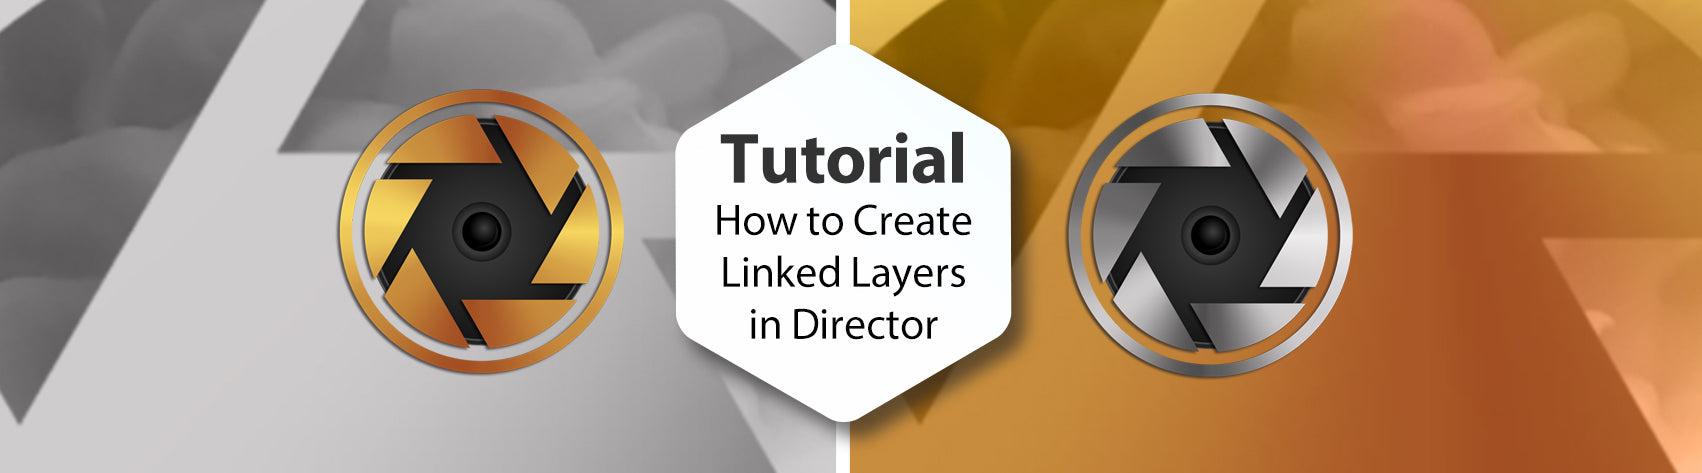 Tutorial - How to Create Linked Layers in Director